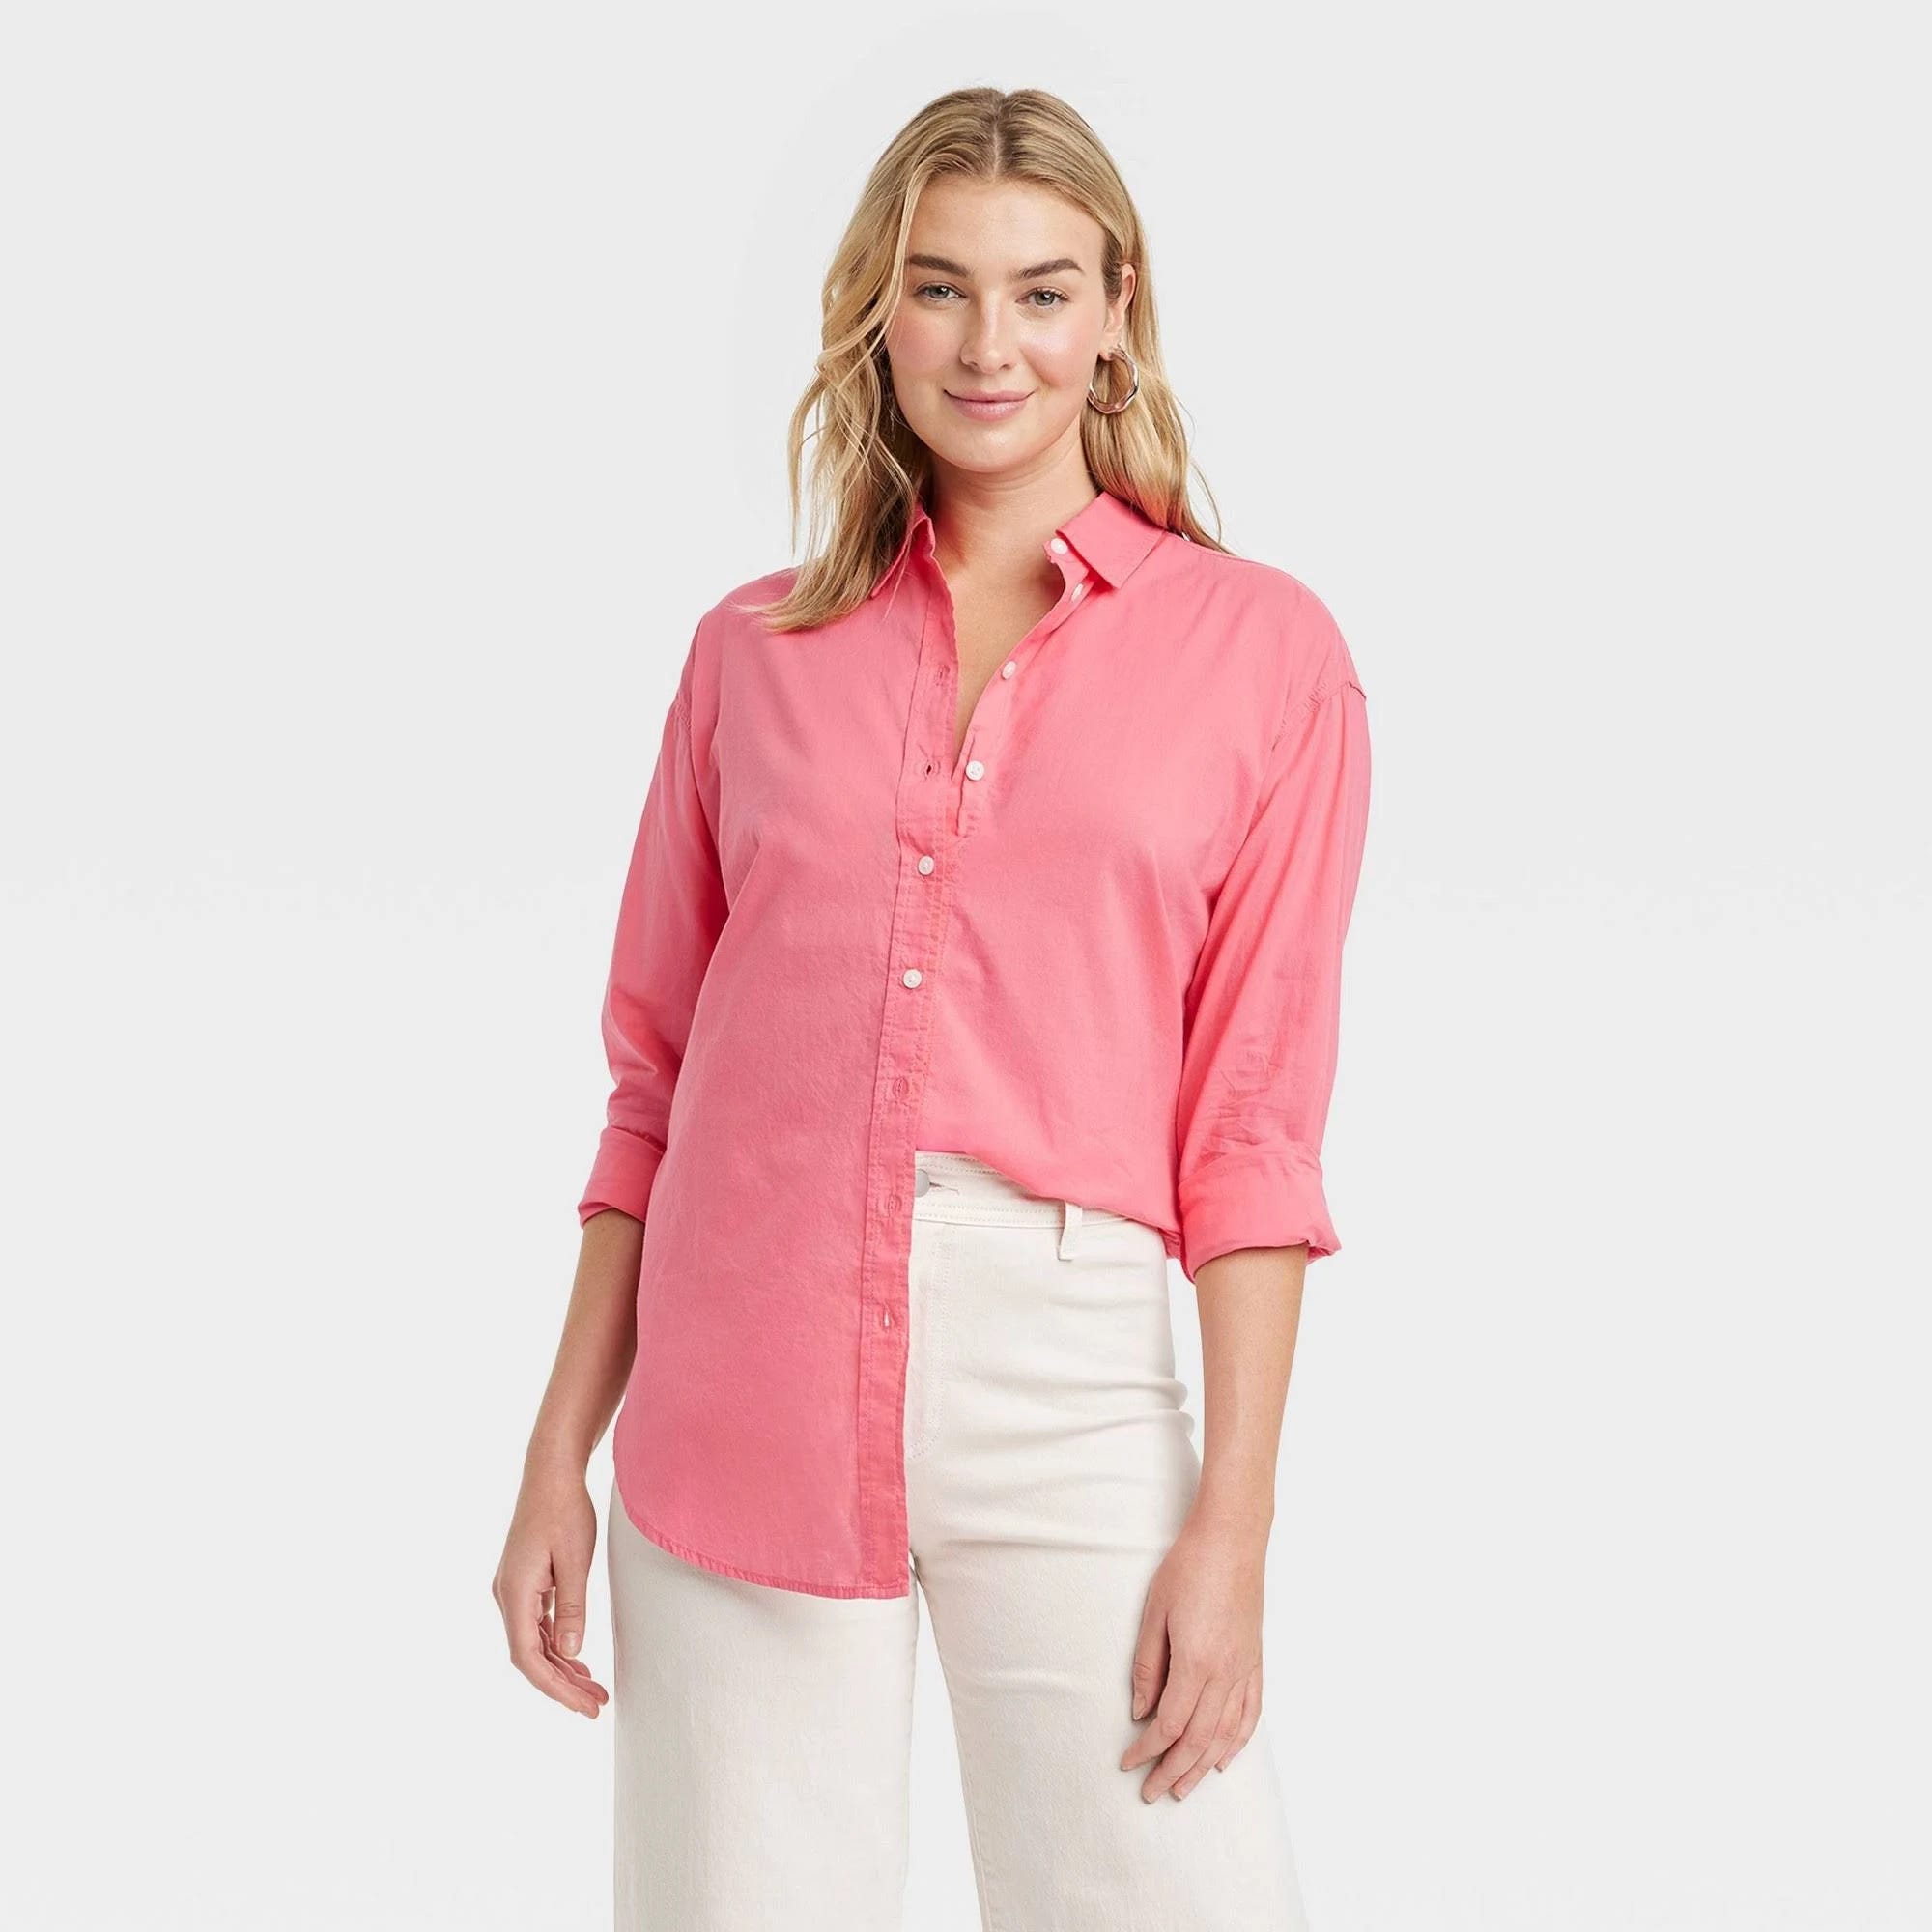 Versatile Collared Long-Sleeve Button-Down Shirt for Women | Image